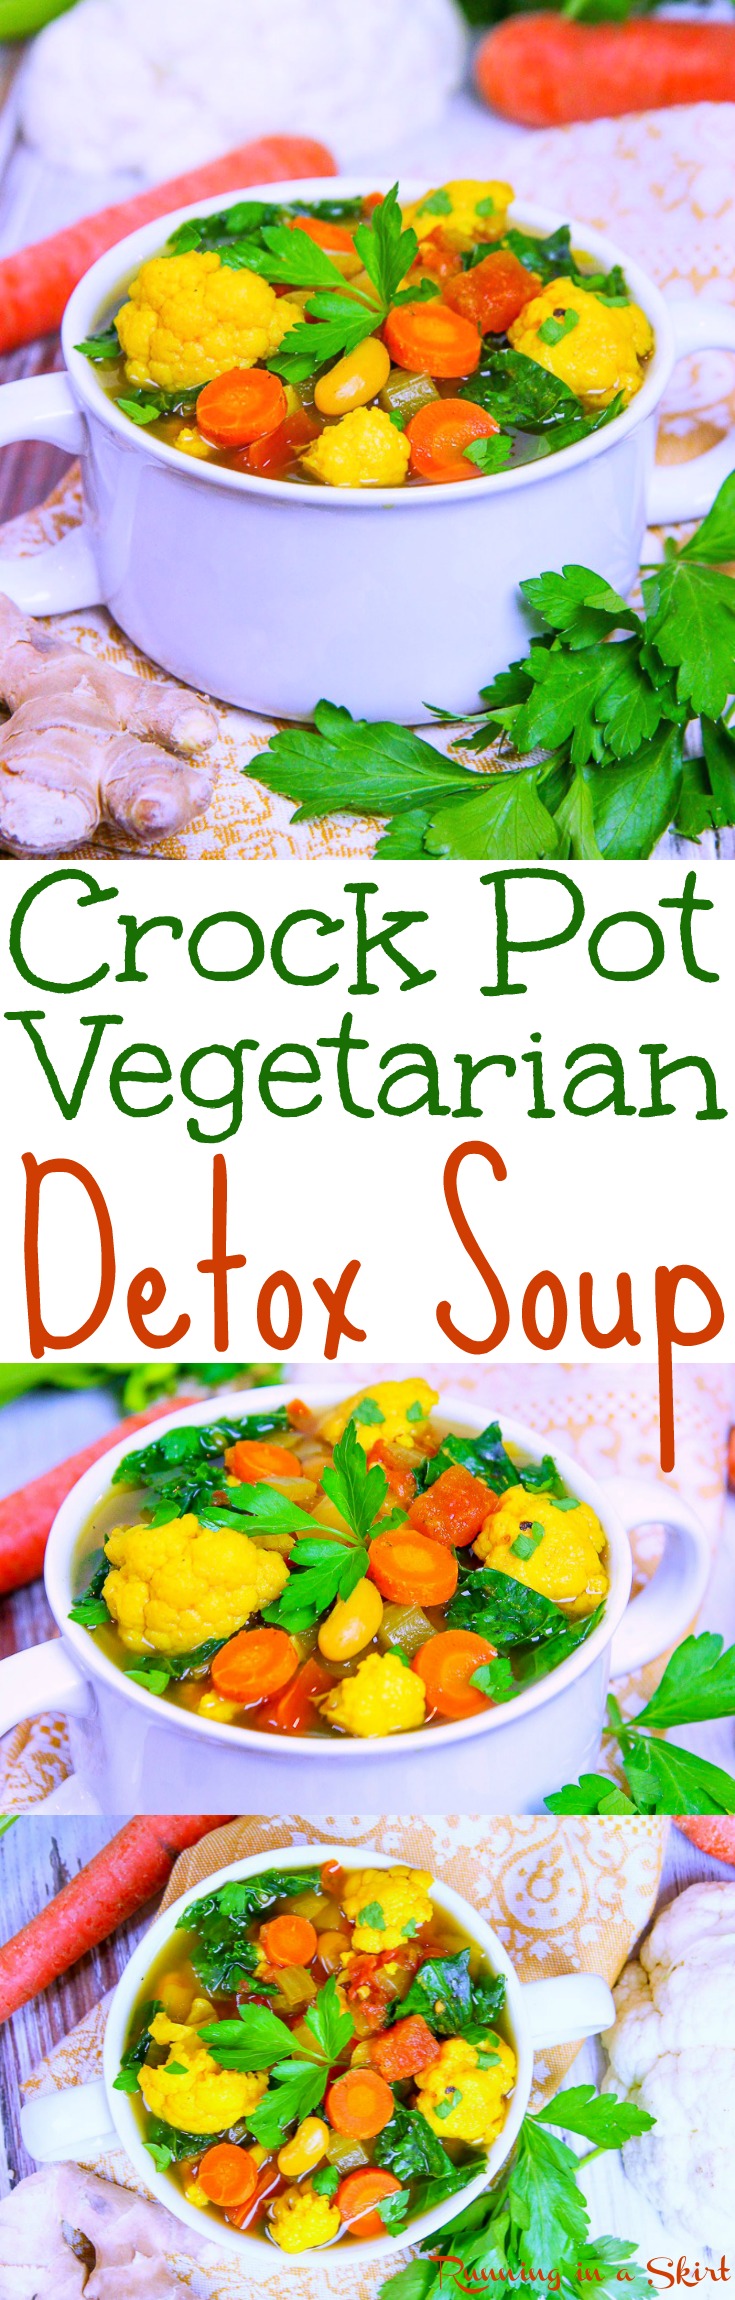 Crock Pot Vegetarian Detox Soup recipe... with ginger and turmeric - perfect immune boosting foods and anti inflammatory recipes. The best healthy vegan, gluten free, low carb and clean eating soup for weightloss and cleanses. With cauliflower, carrots, tomato and kale! Easy, simple, quick and ideal for the slow cooker or crockpot. / Running in a Skirt via @juliewunder